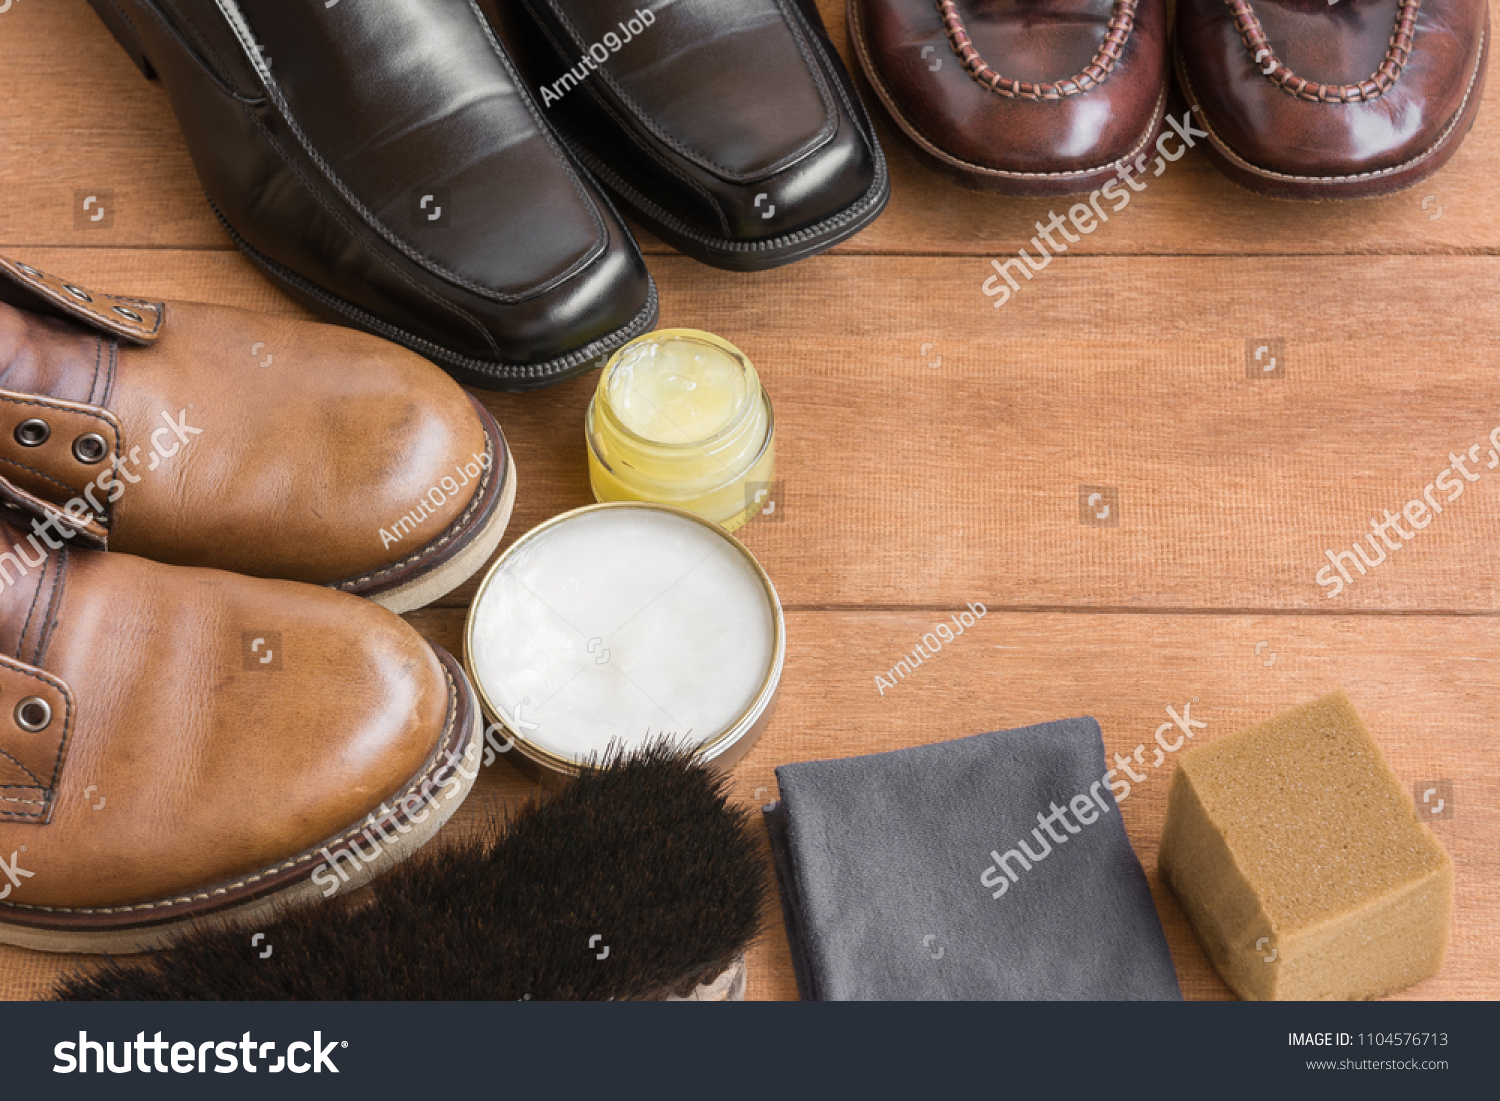 how to clean old leather shoes